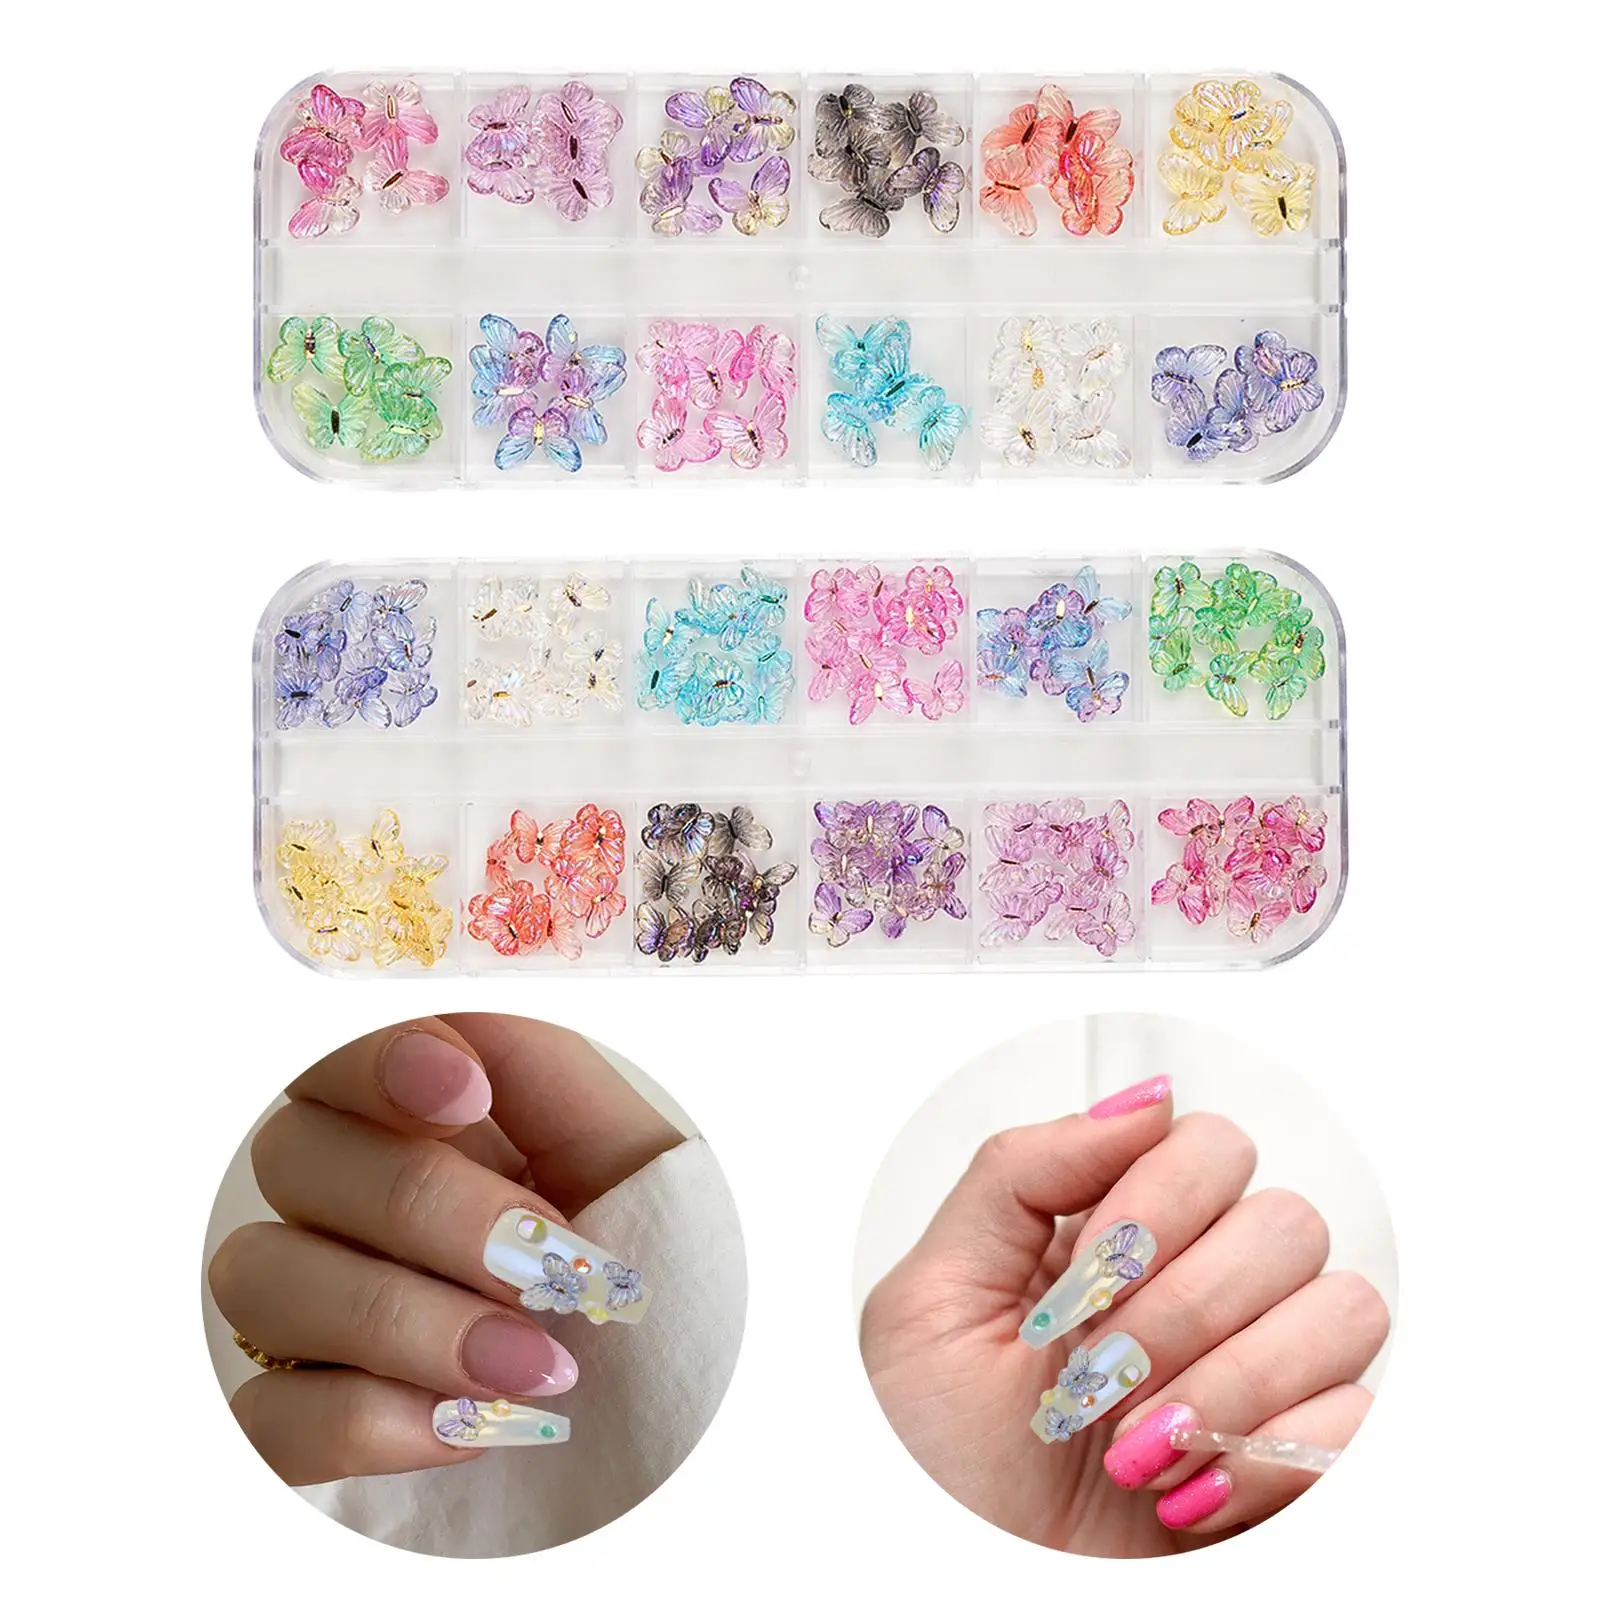 Nail Art Rhinestones Set Supplies Women Girls Spring Summer Cute Butterfly Nail Art Charms Shiny for Professional Use DIY Crafts